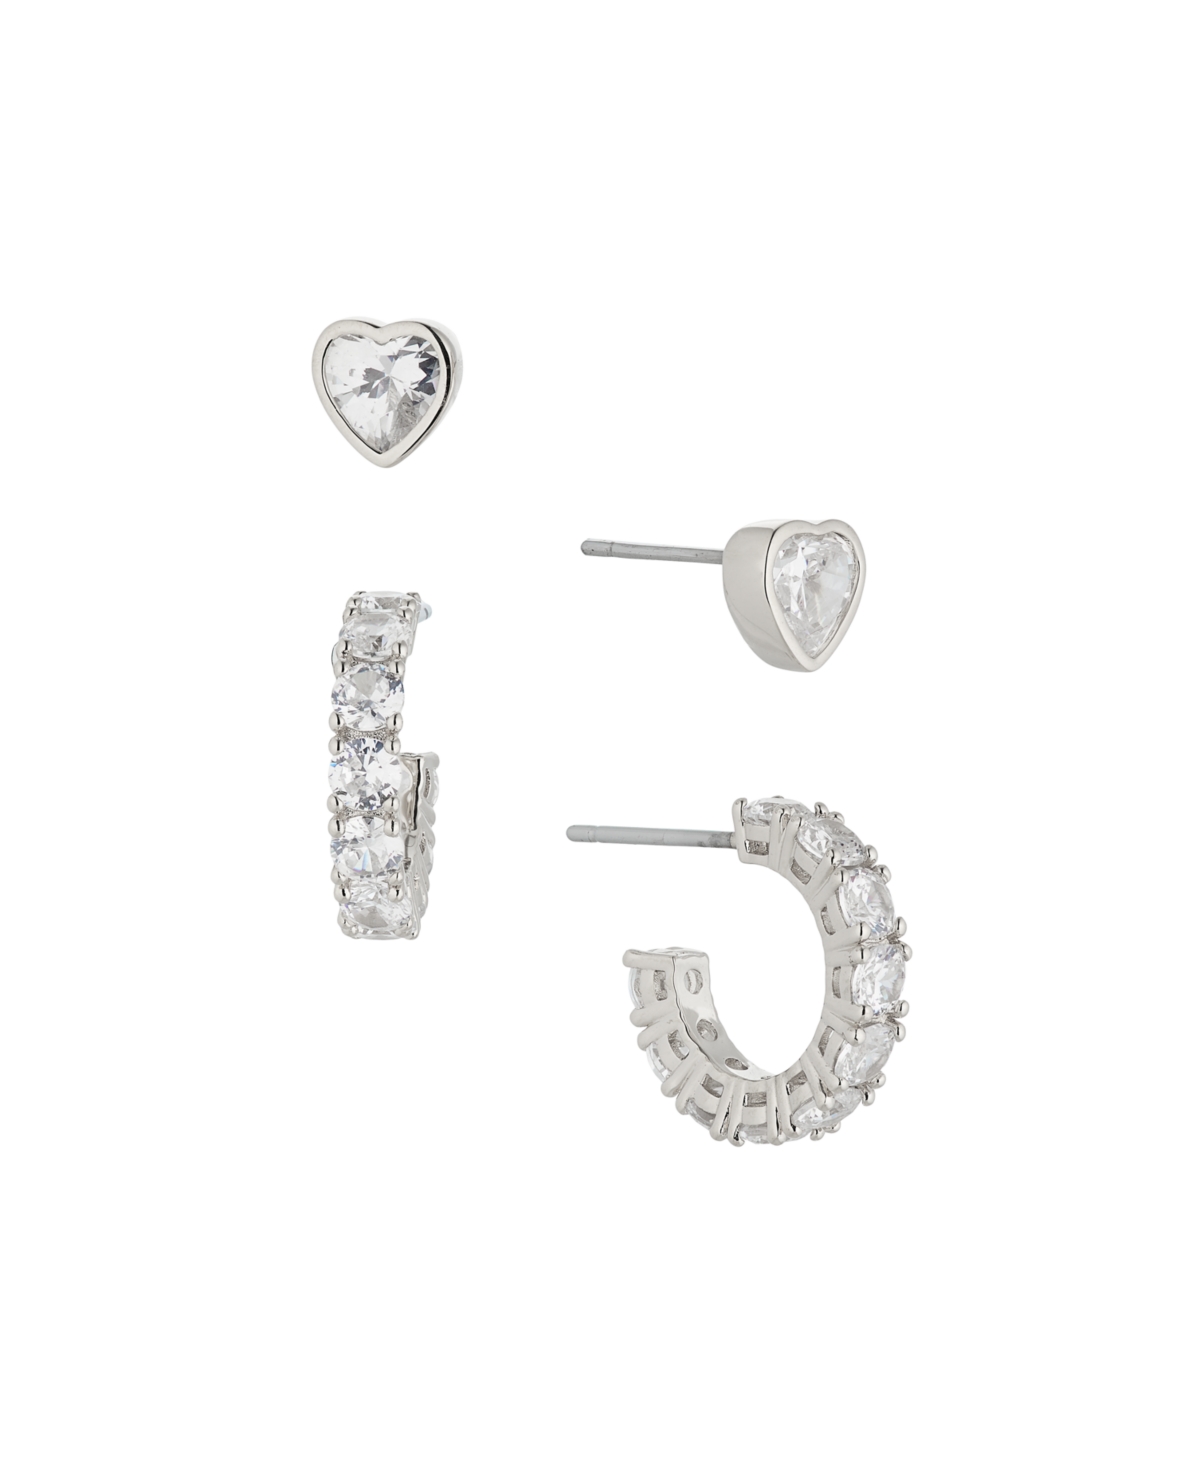 Eliot Danori Cubic Zirconia 2-pieces Heart Studs And Small Hoops Earring Set, Created For Macy's In Silver